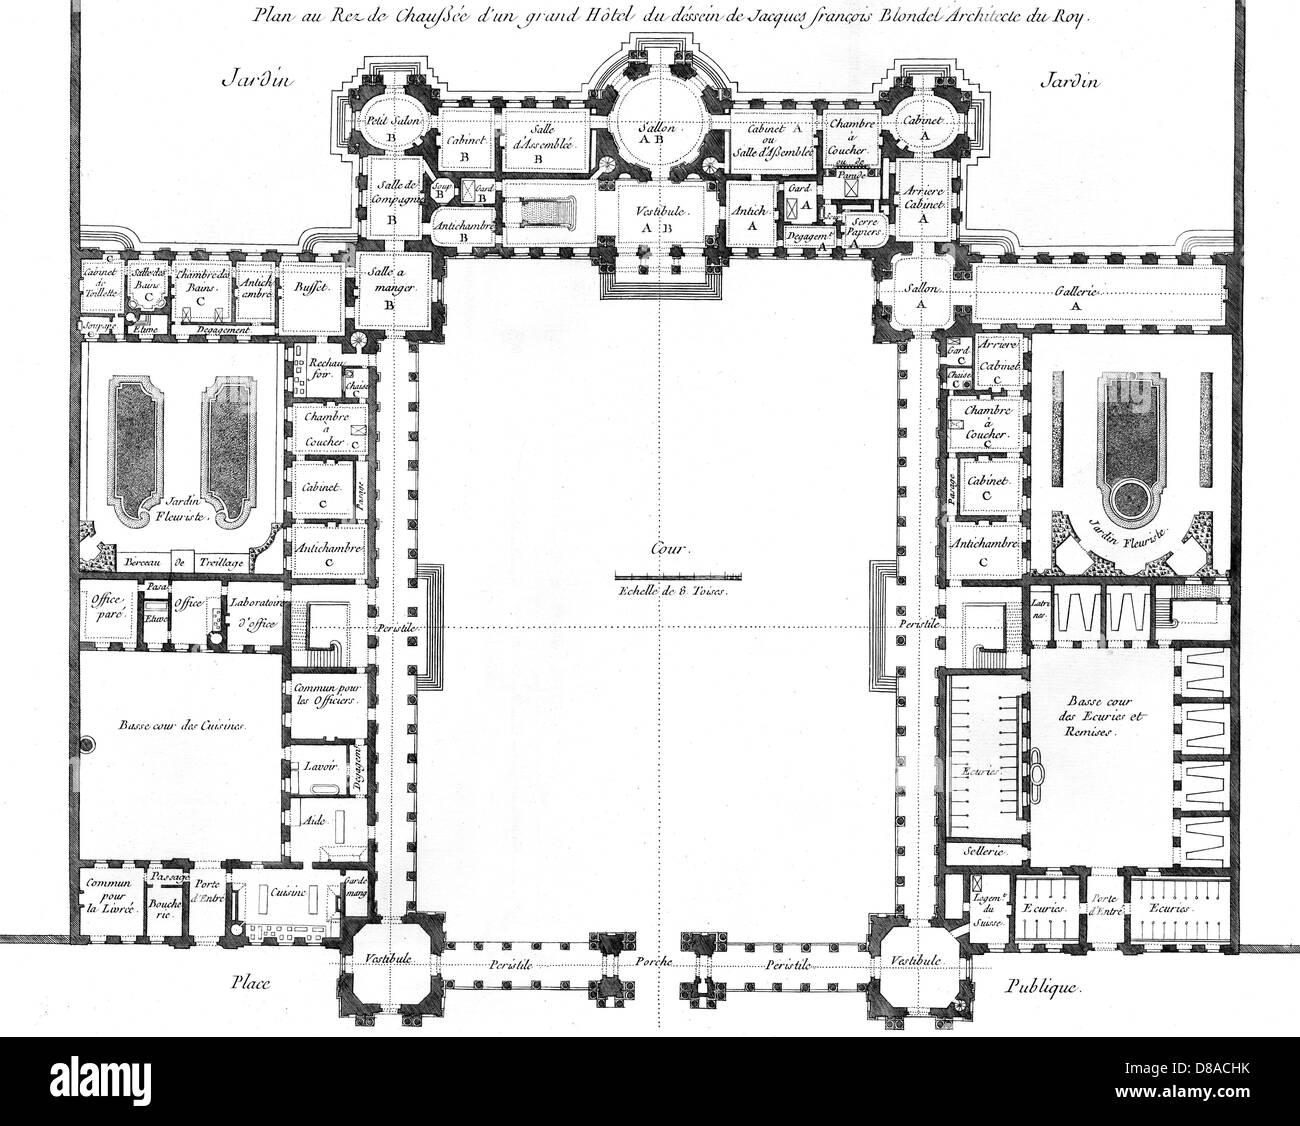 18TH C FRENCH HOTEL PLAN Stock Photo